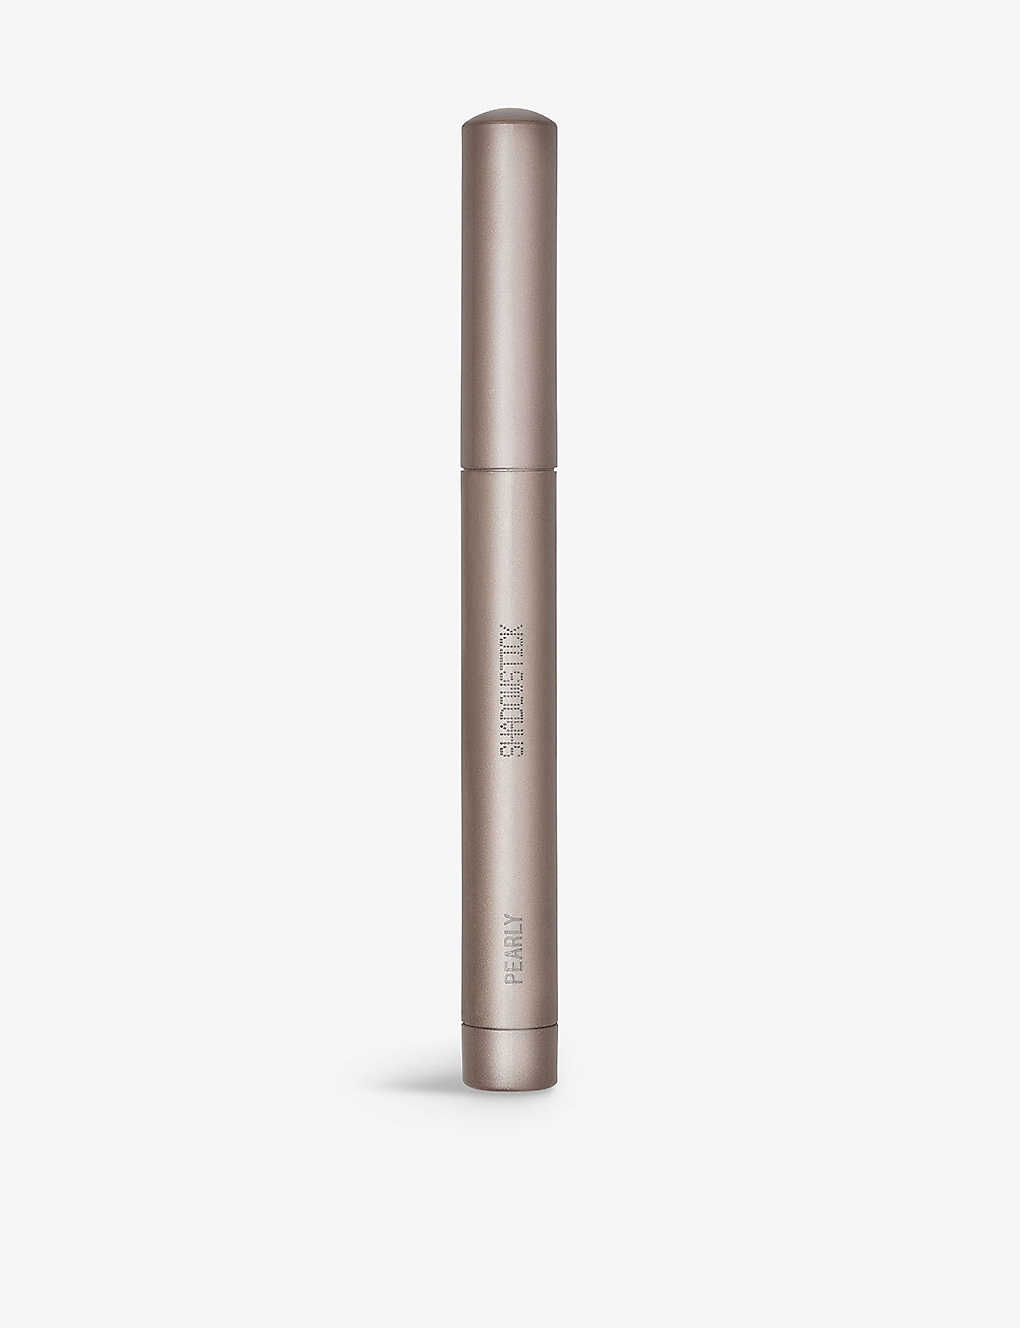 About-face Actual Ambrosia Shadowstick Matte Finish 1.4g